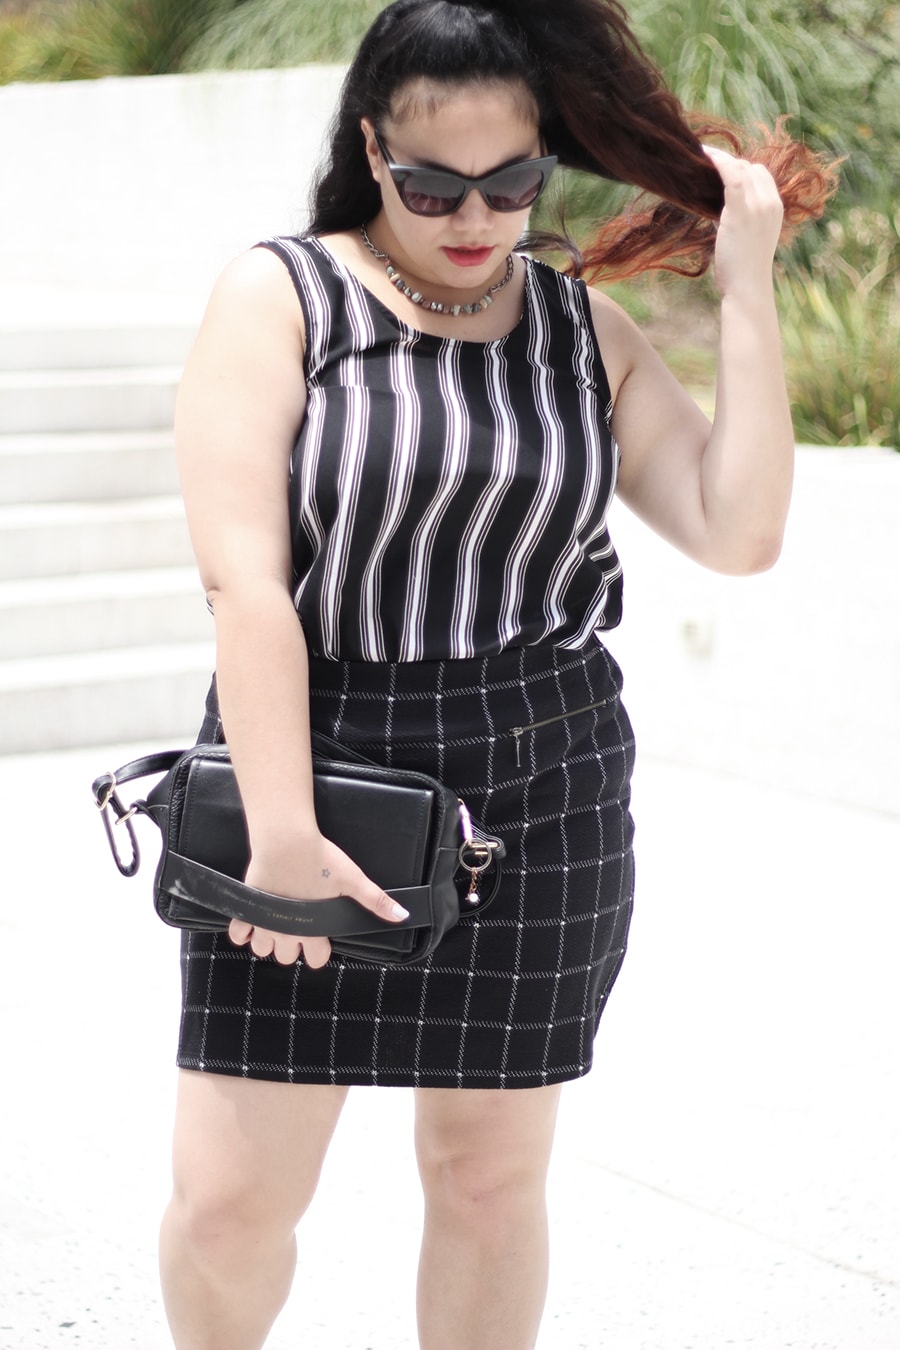 mixing-patterns-outfit-ideas-how-to-combinar-estampados-blogger-mexicana-plus-size-look-stripes-black-white-luisa-verdee-golden-strokes-1